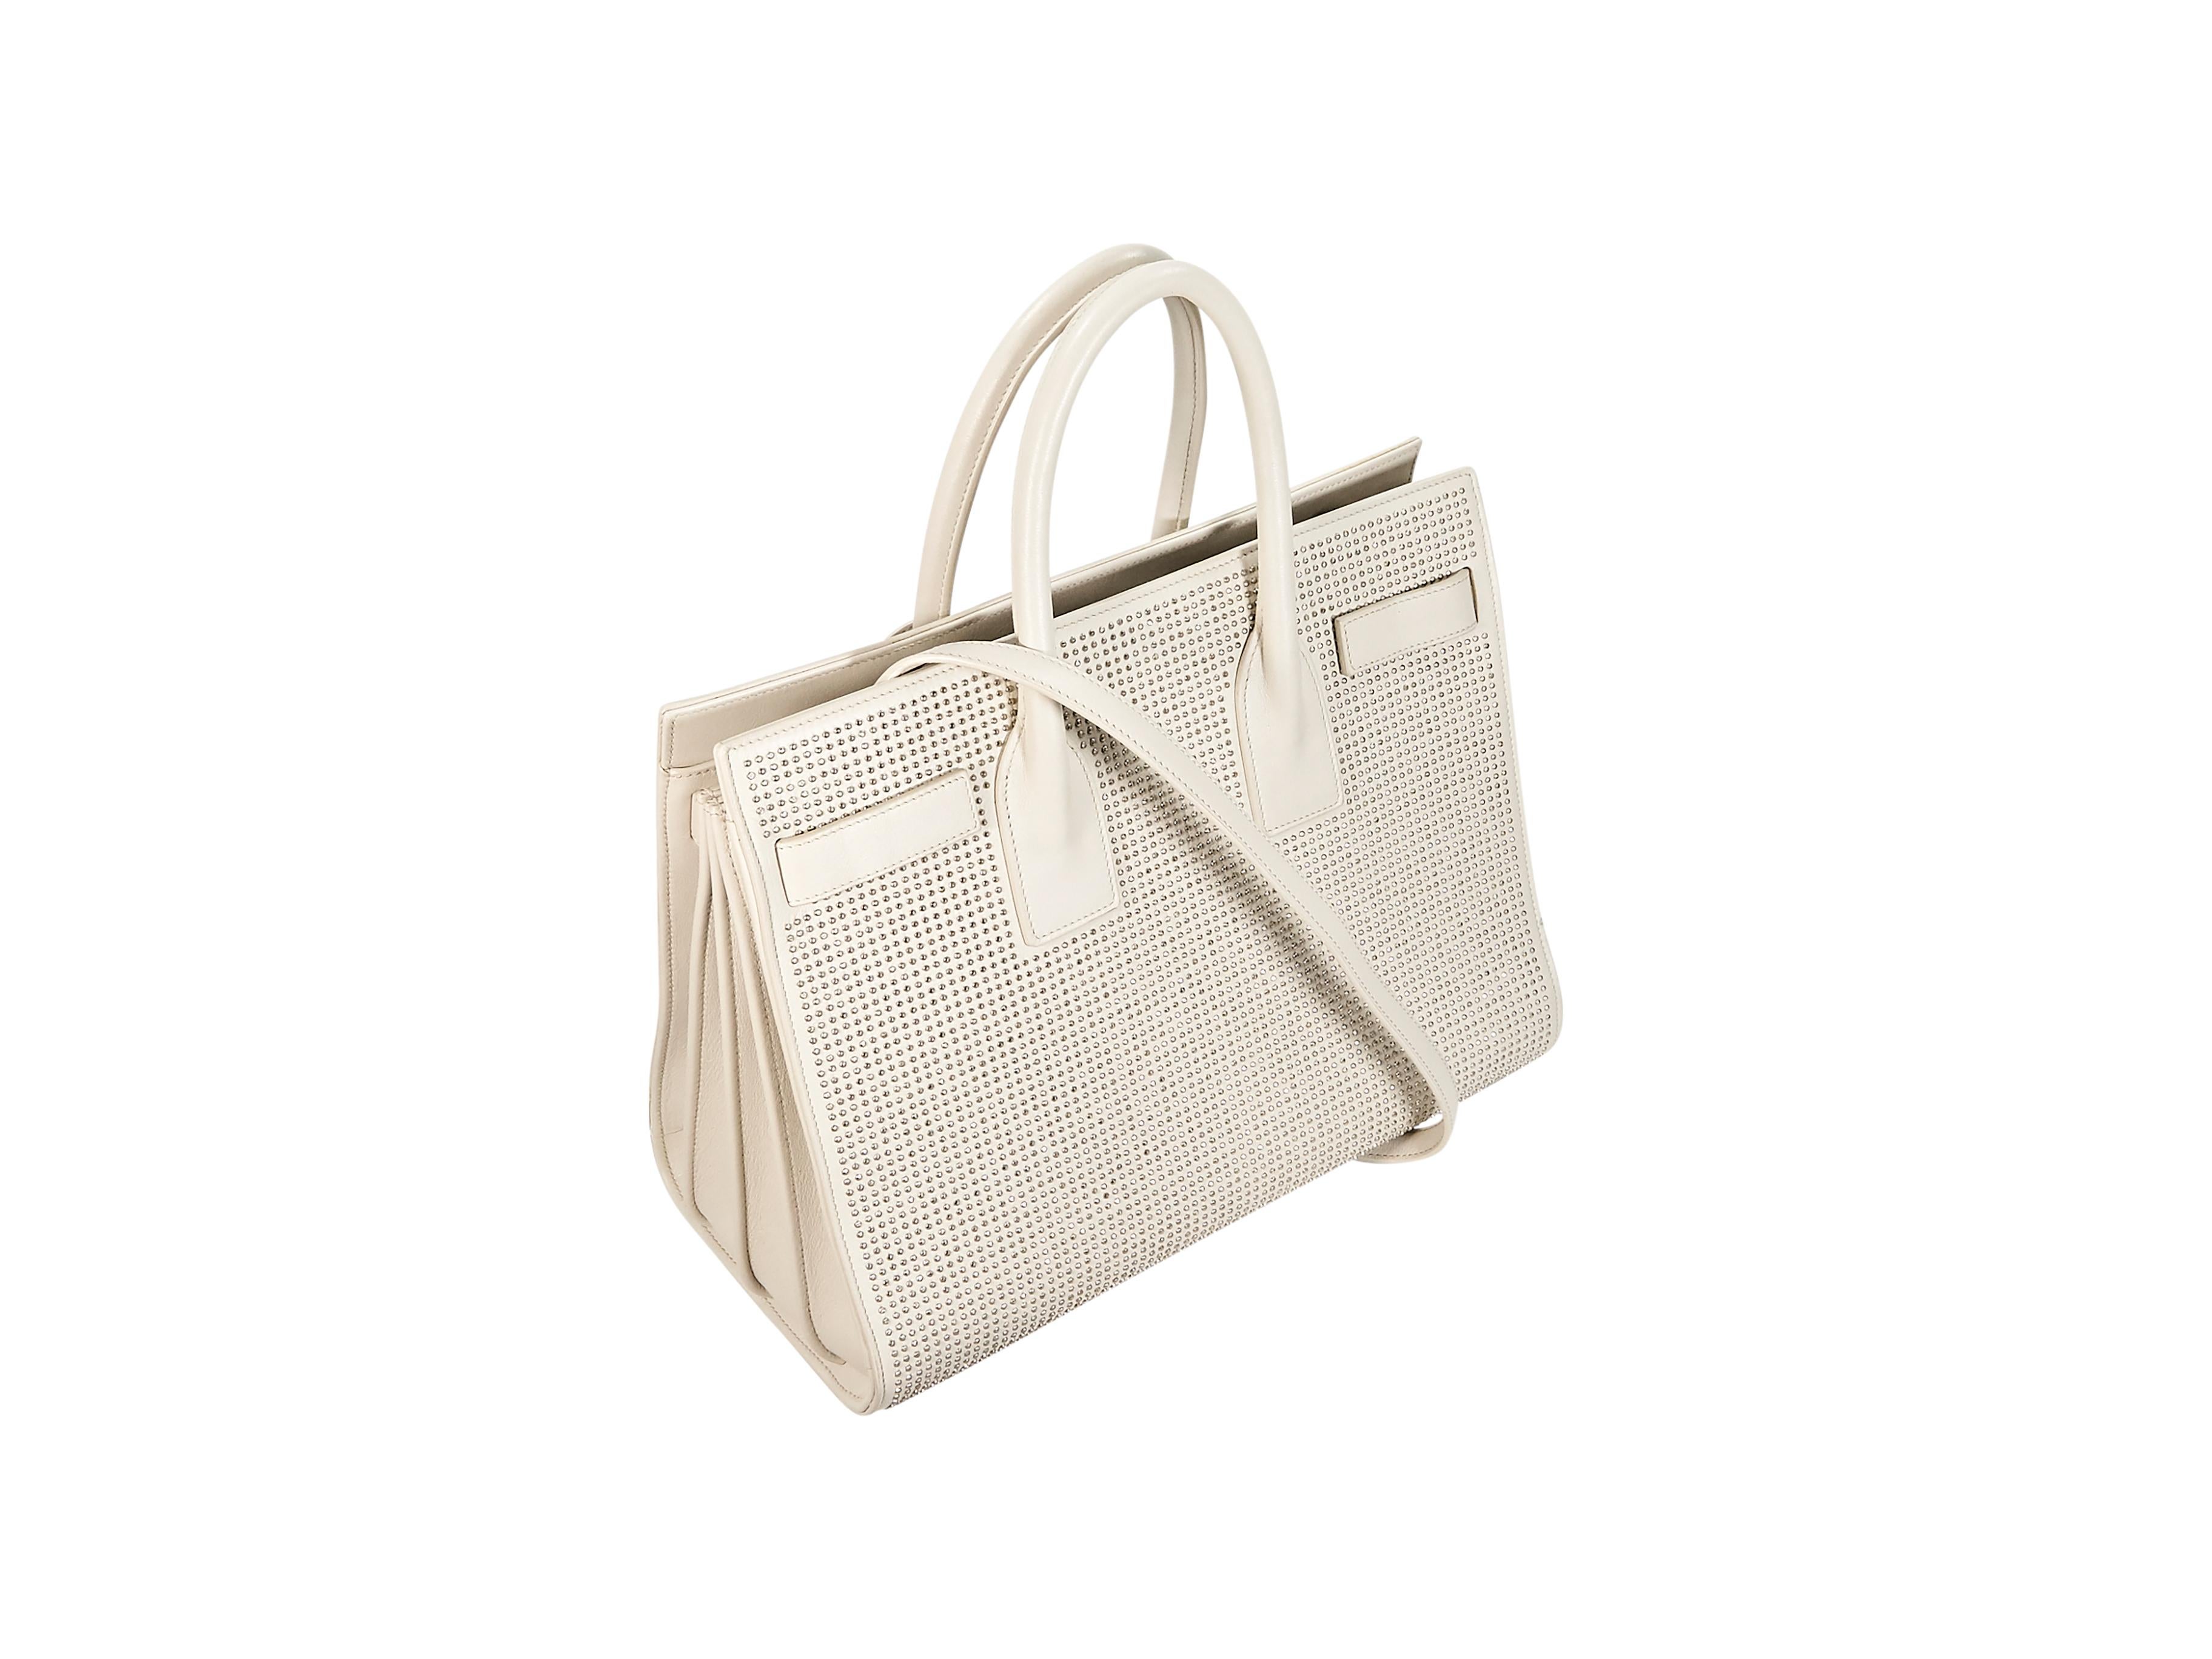 Product details:  White studded leather Sac de Jour satchel by Saint Laurent.  Dual top carry handles.  Detachable shoulder strap.  Open top.  Lined interior with center zip compartment and inner slide and zip pockets.  Protective metal feet. 